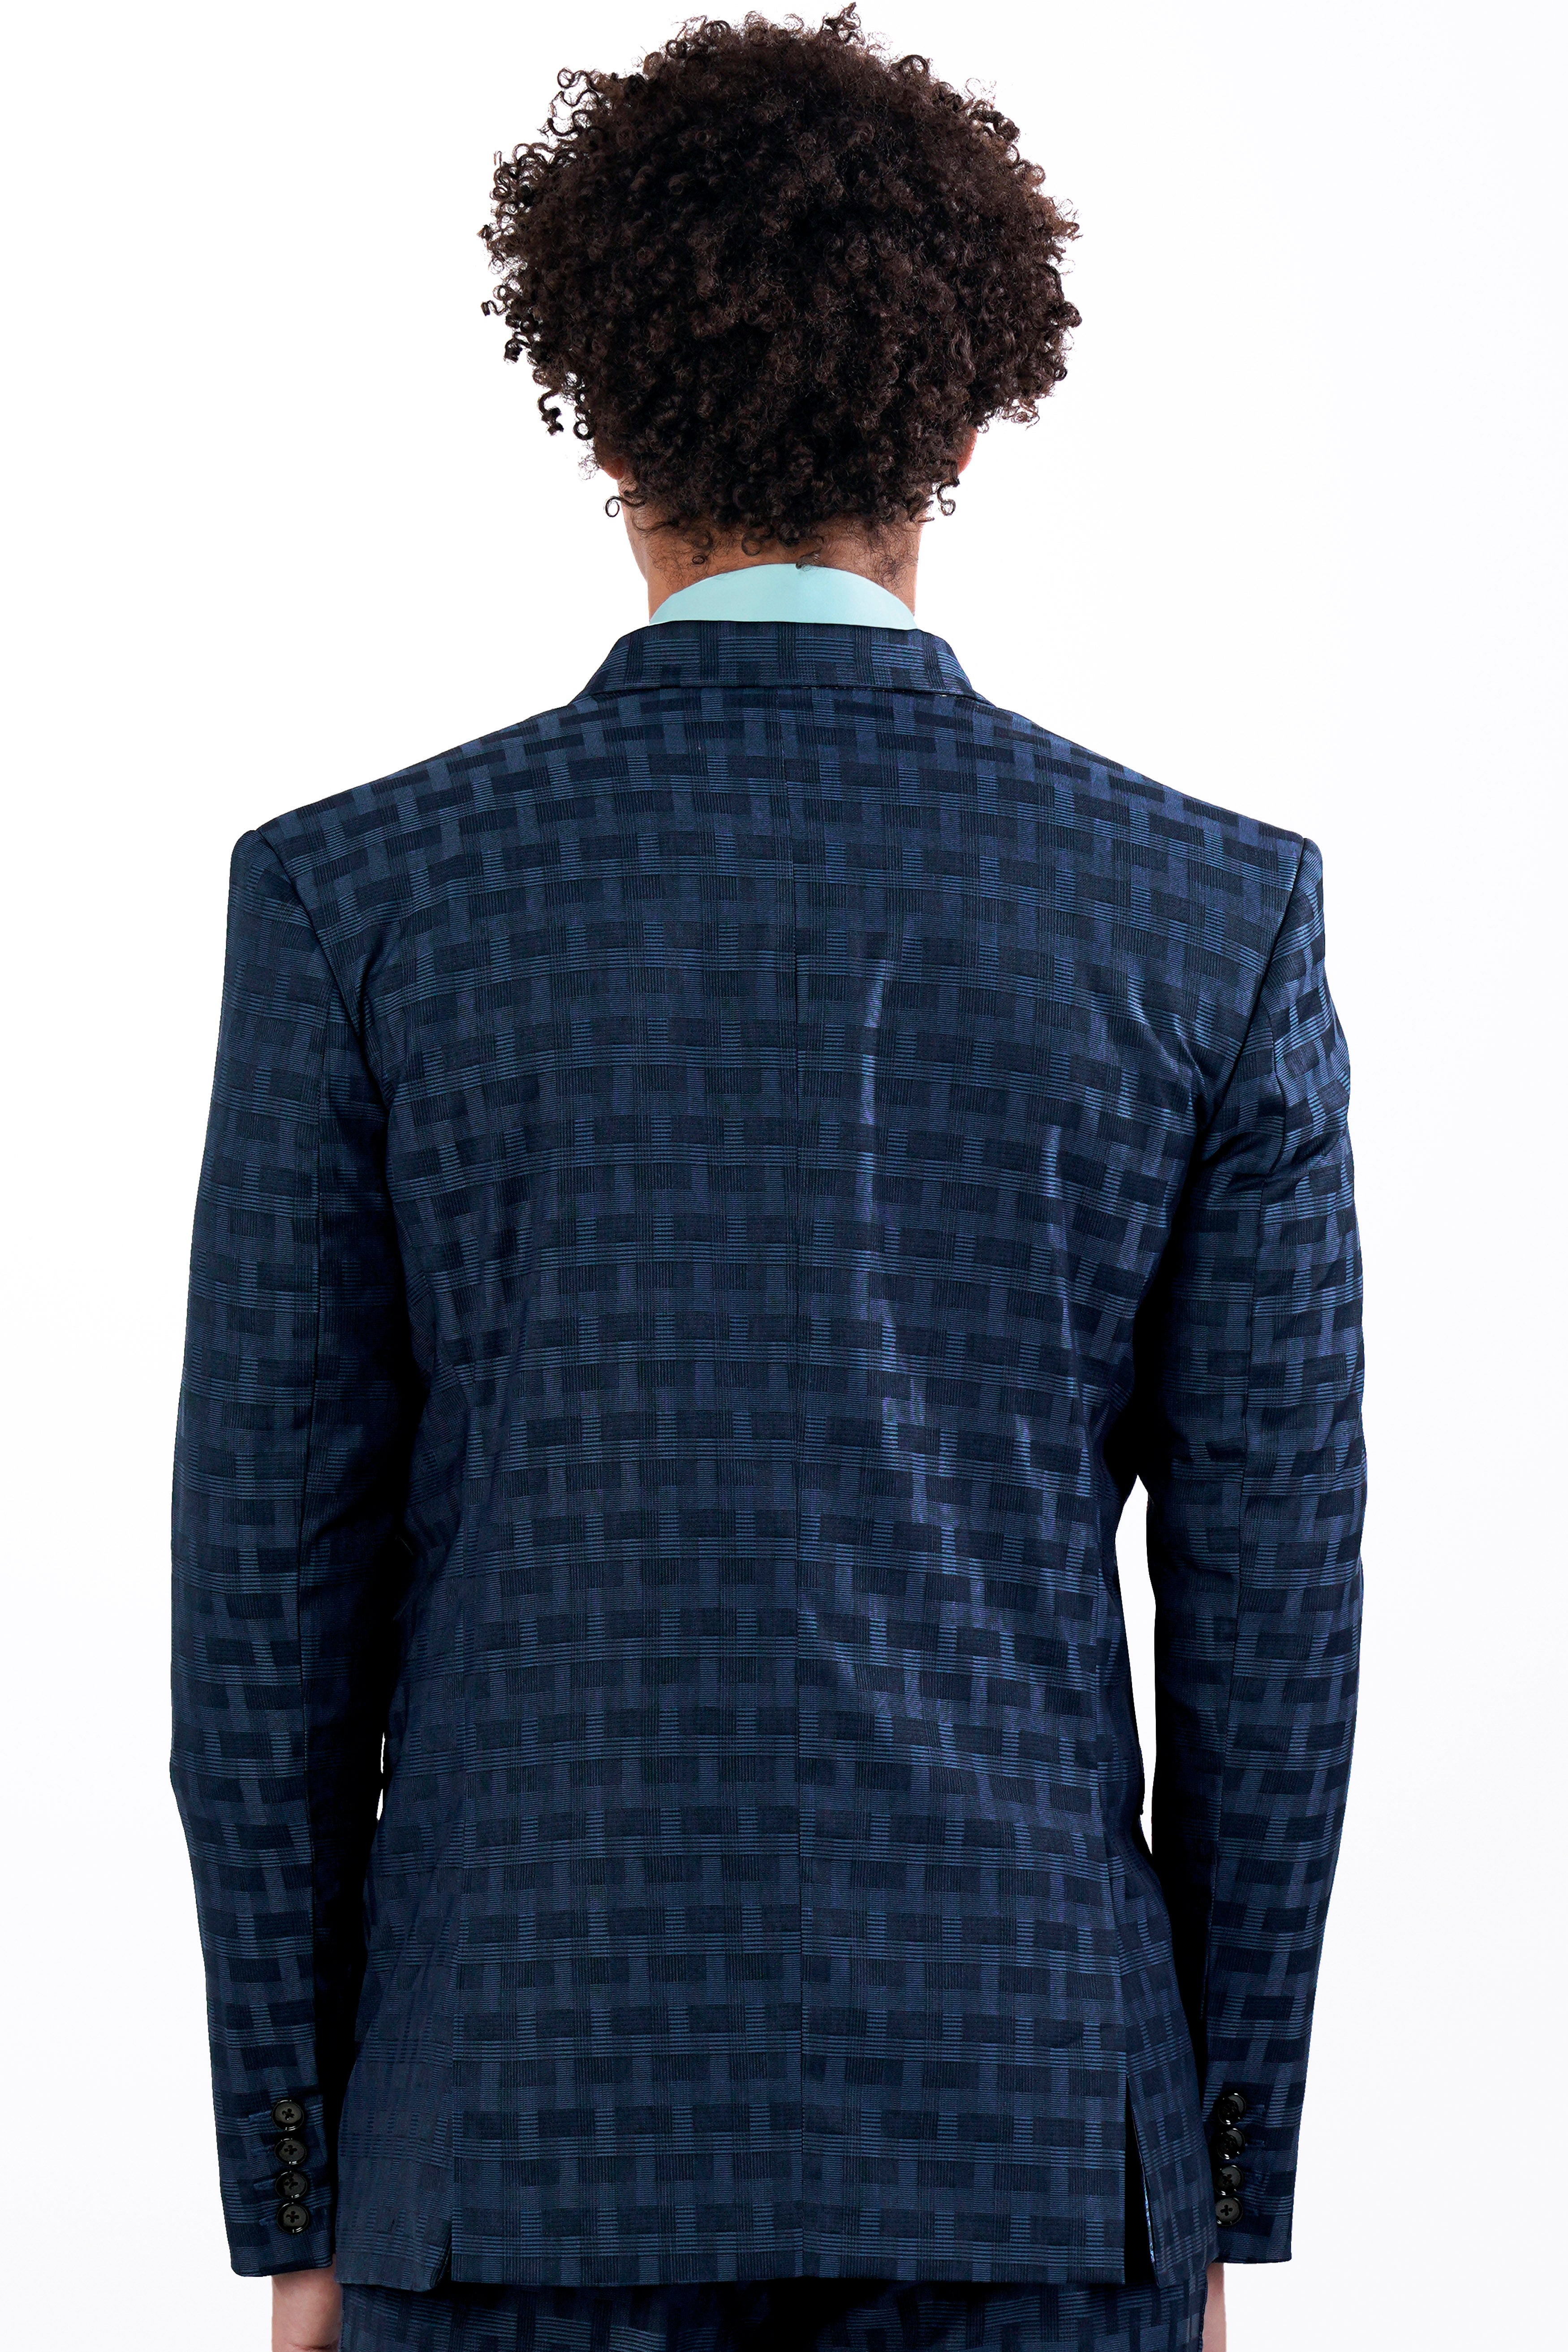 Midnight Blue with Nile Blue Jacquard Textured Double Breasted Blazer BL2910-DB-36, BL2910-DB-38, BL2910-DB-40, BL2910-DB-42, BL2910-DB-44, BL2910-DB-46, BL2910-DB-48, BL2910-DB-50, BL2910-DB-52, BL2910-DB-54, BL2910-DB-56, BL2910-DB-58, BL2910-DB-60